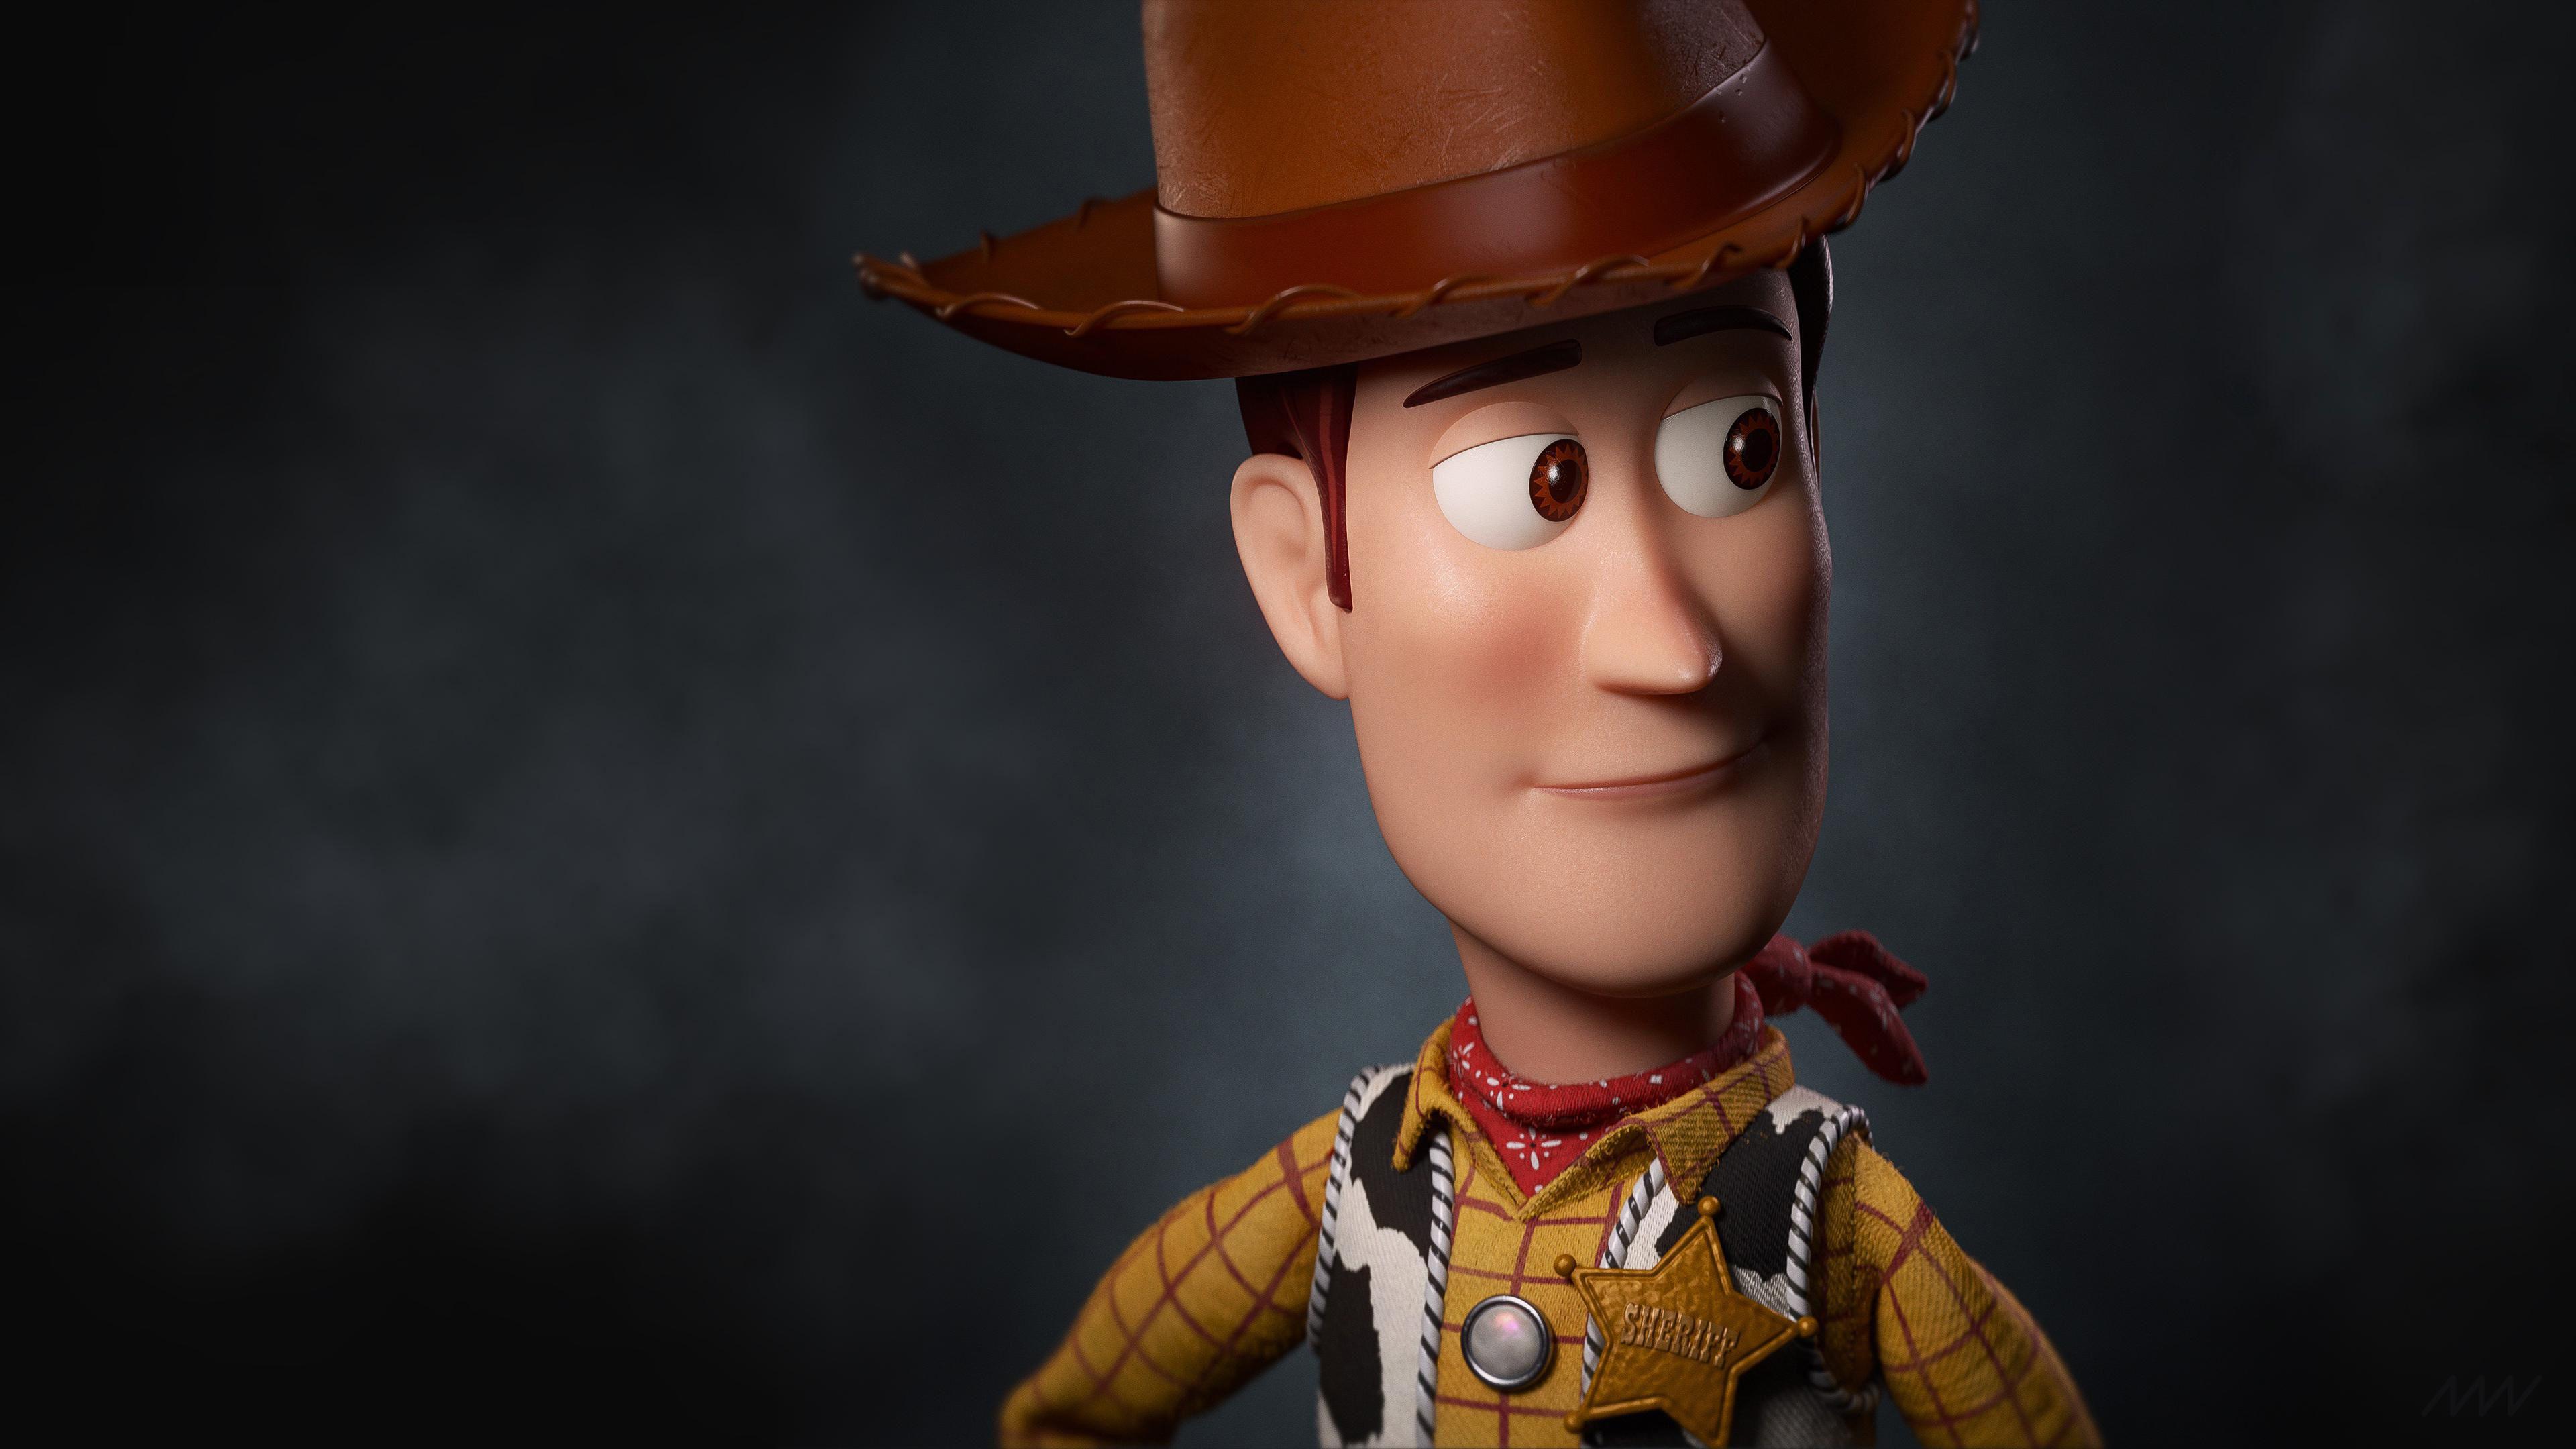 download Toy Story 4 free